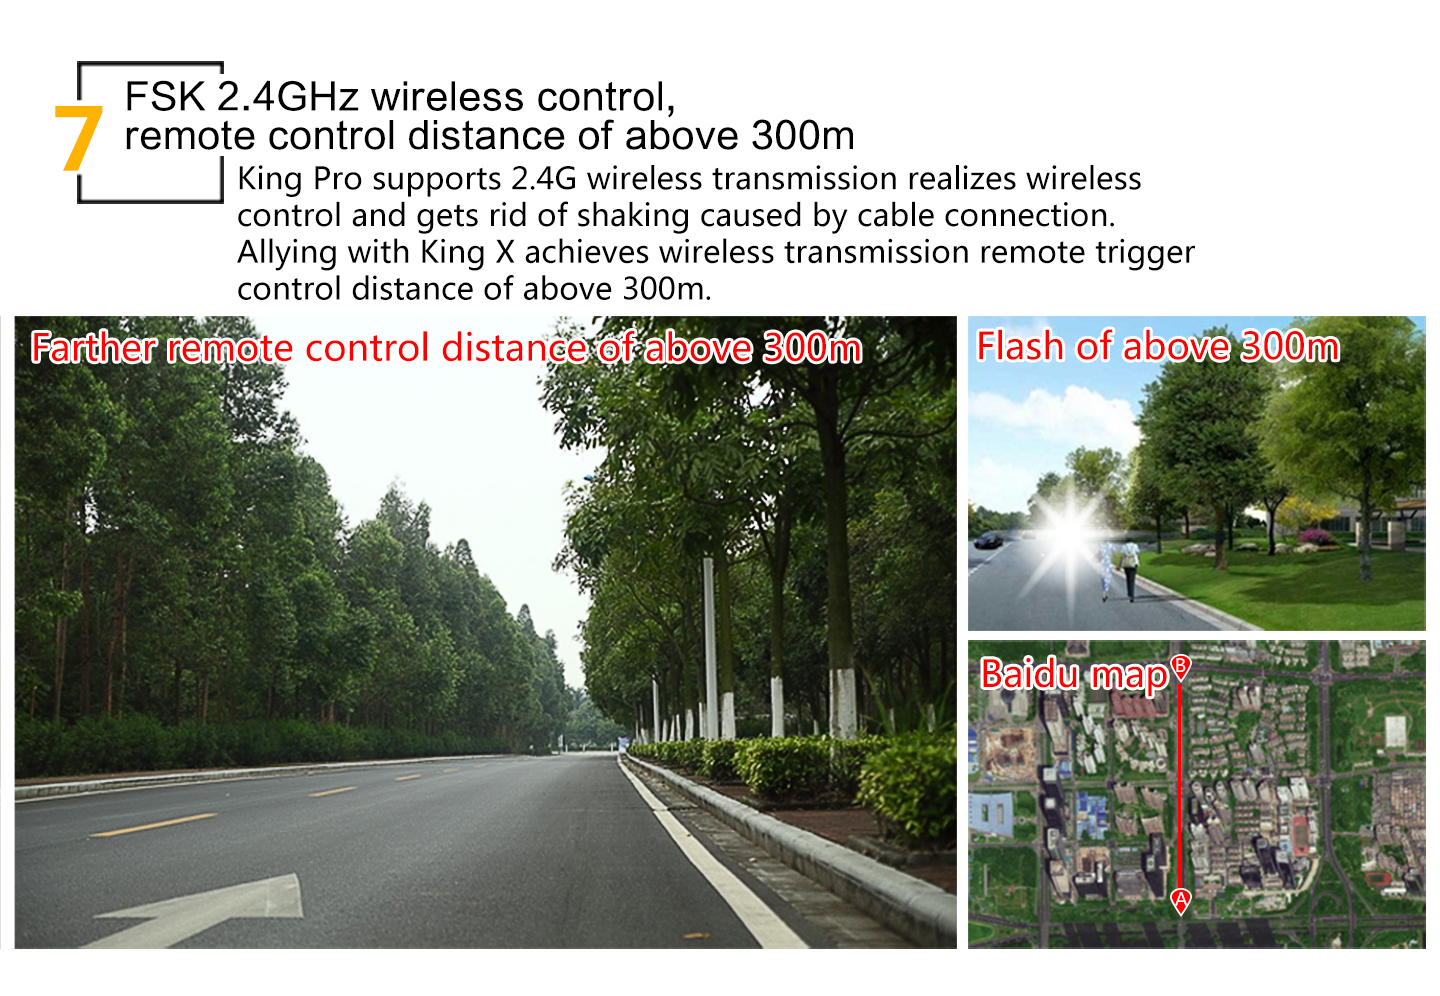 FSK 2.4GHz wireless control, remote control distance of above 300m